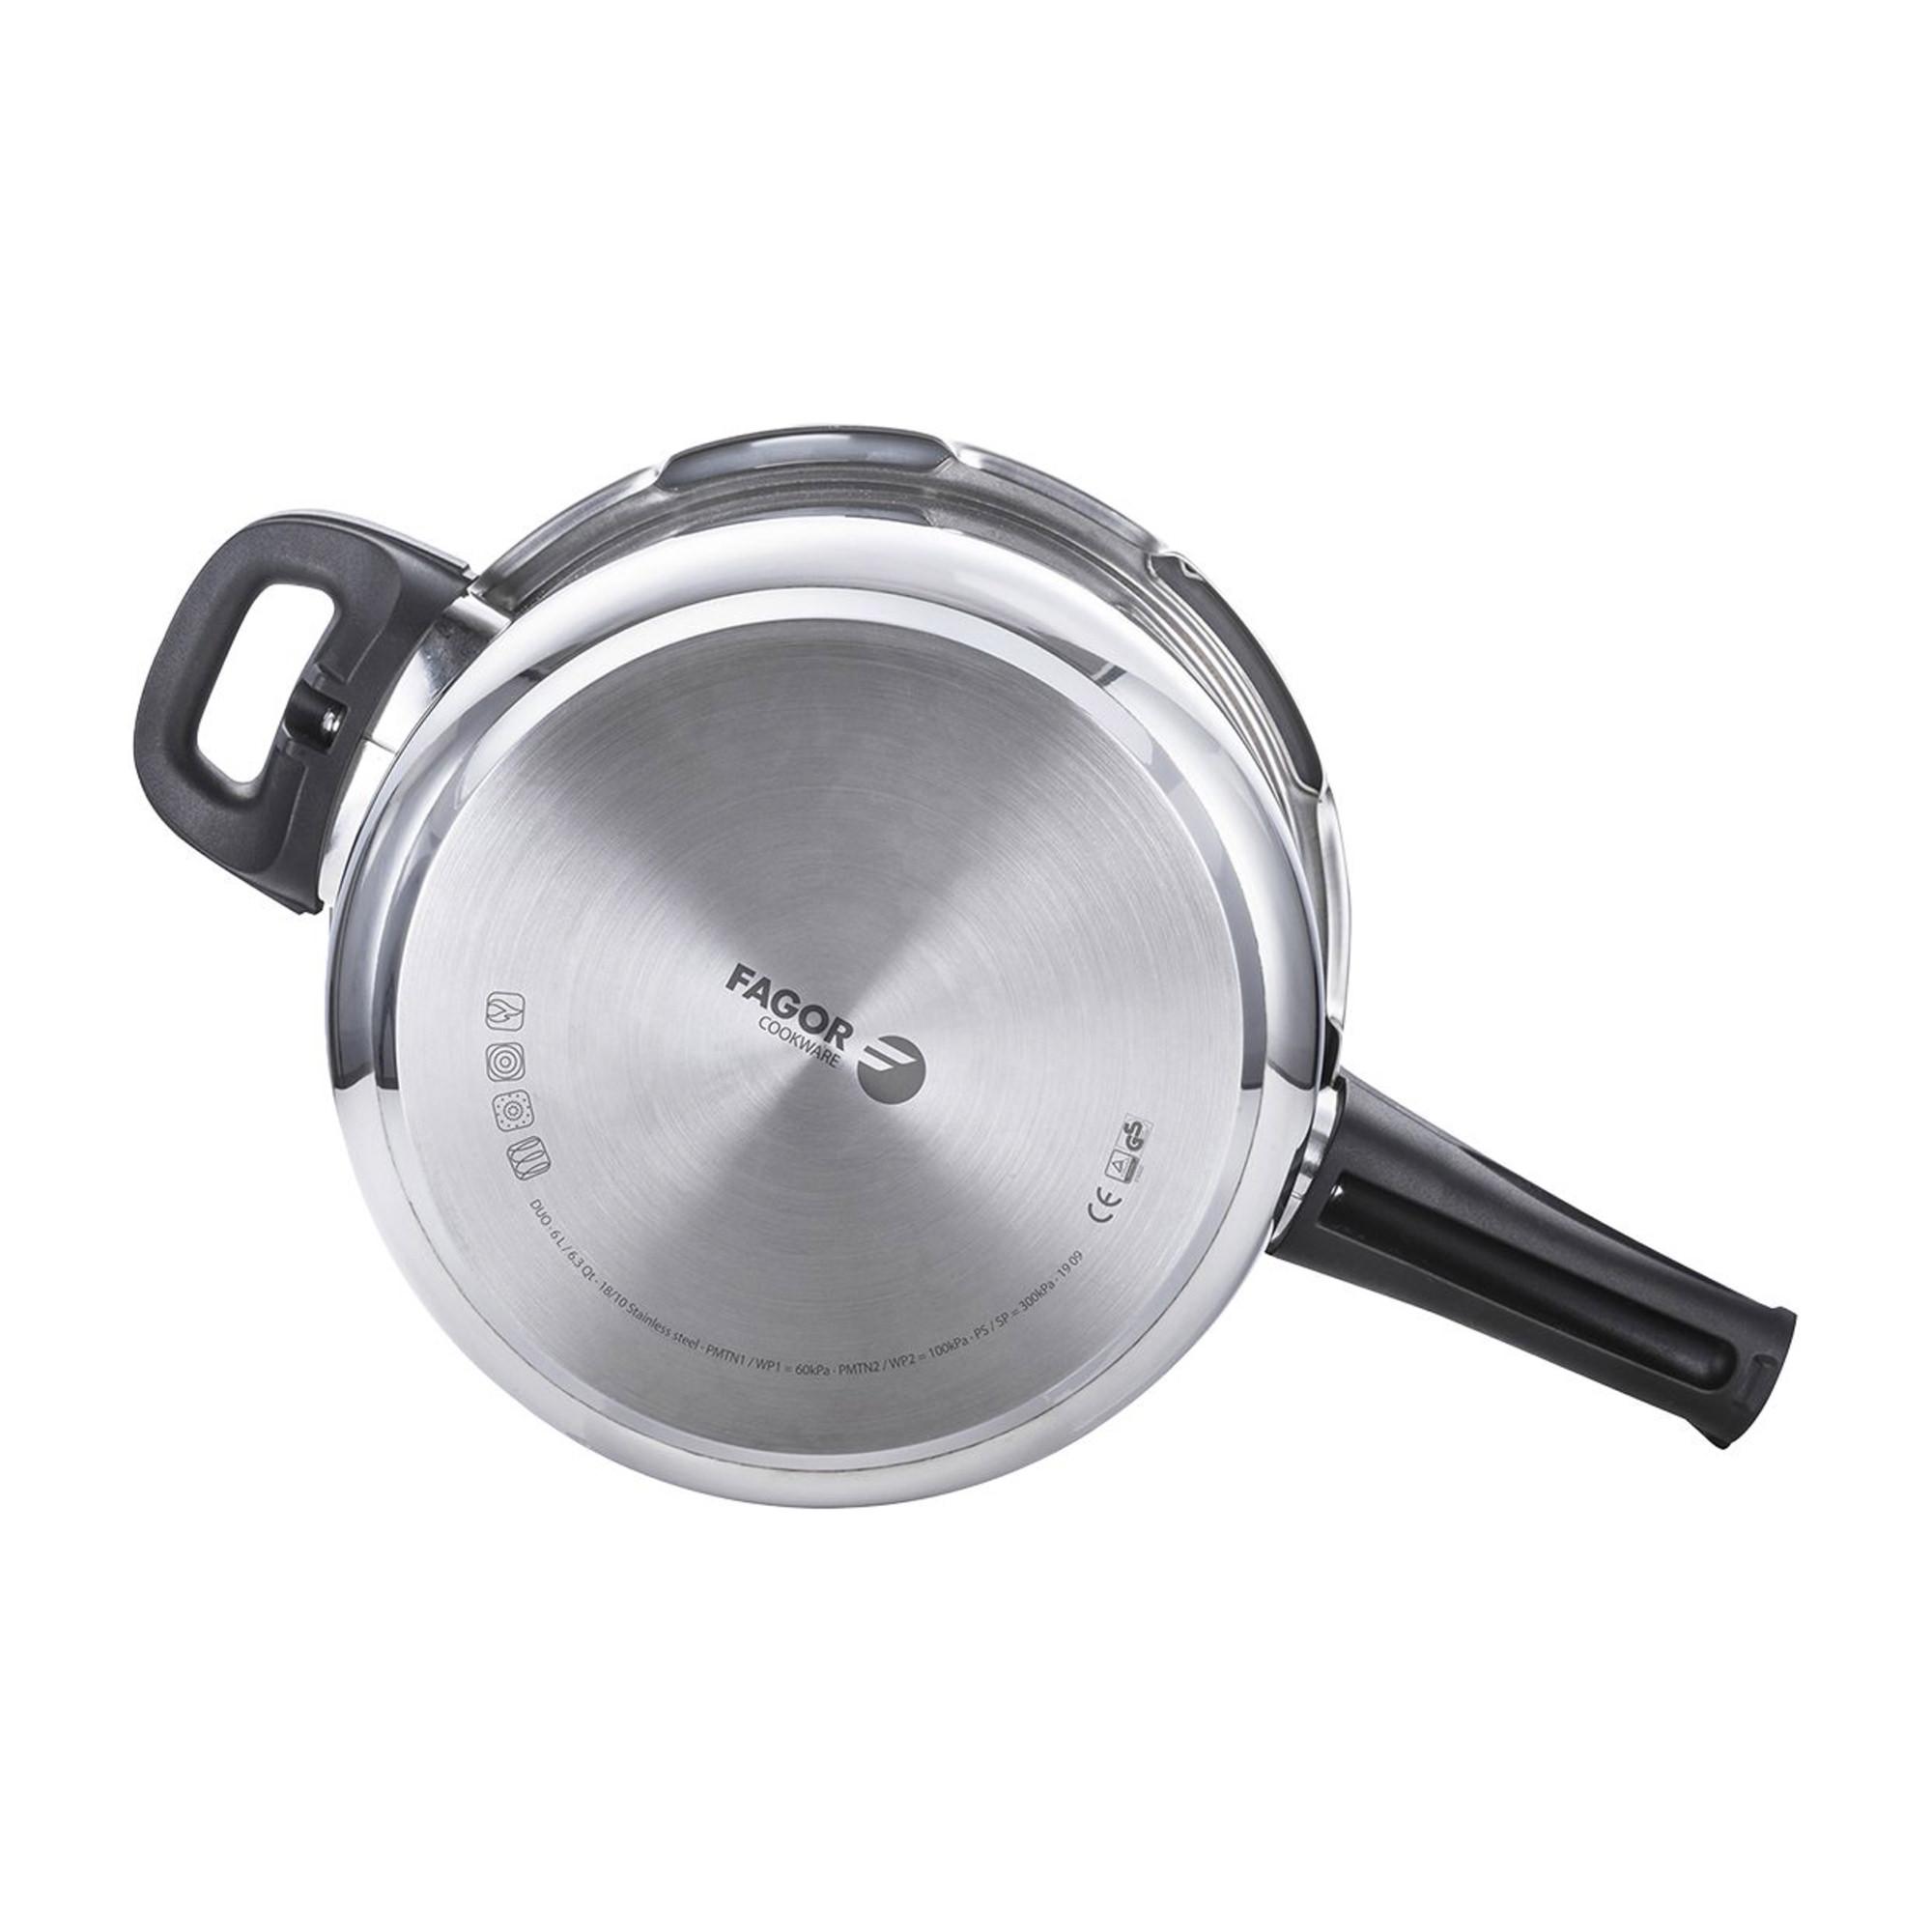 Fagor Duo Stainless Steel Pressure Cooker 7.5L Image 4